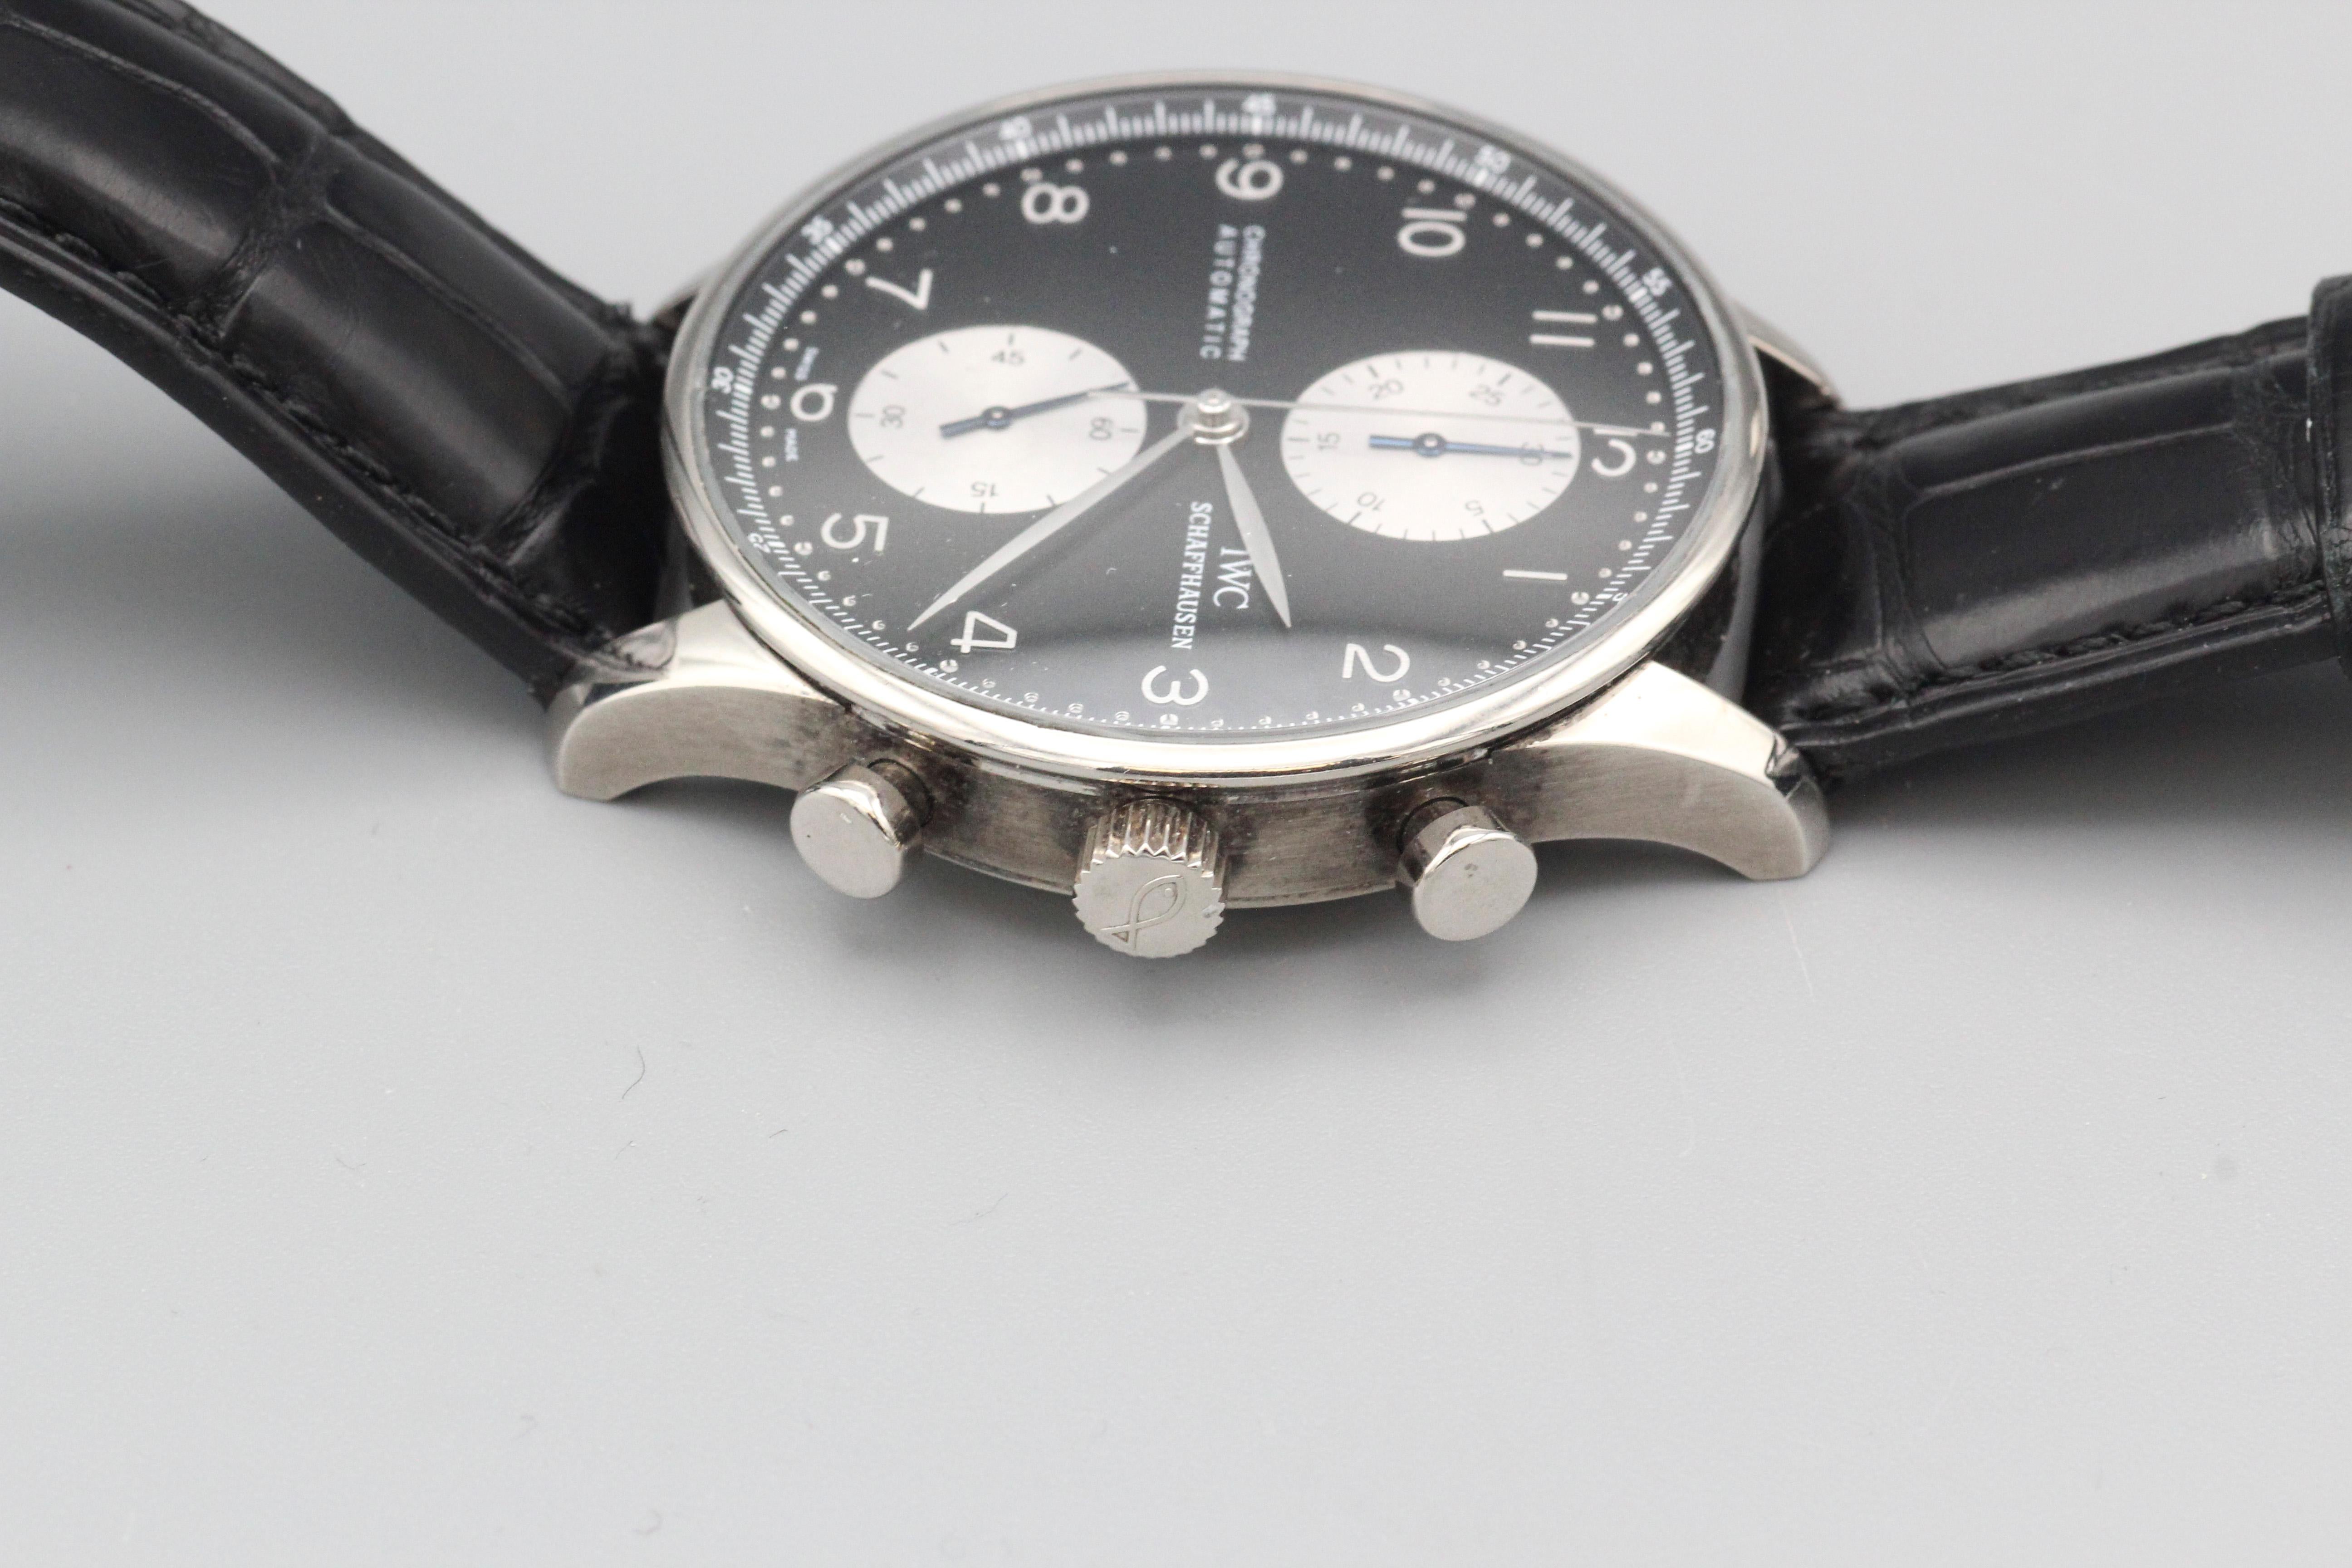 IWC Portugieser 18k White Gold Chronograph Wristwatch with rare Panda Dial For Sale 1